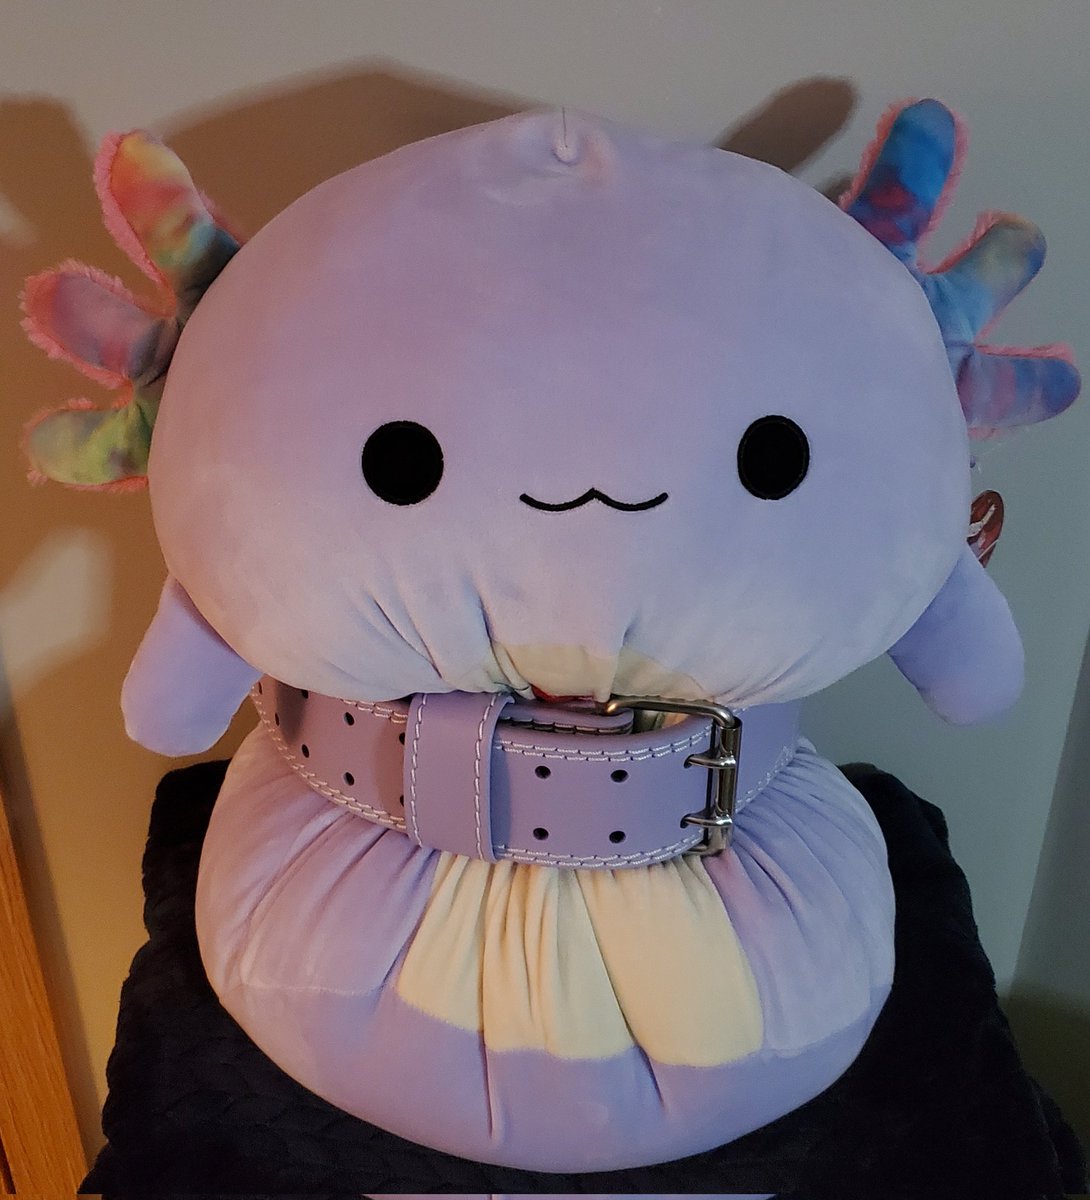 She's ready for gains 💪

#squishmallows #Vtubers #Vtuber #VtuberSupport #VTUBERSUPPORTCHAIN #VTuberUprising #VTuberEN #twitch #twitchstreaming #squishmallow